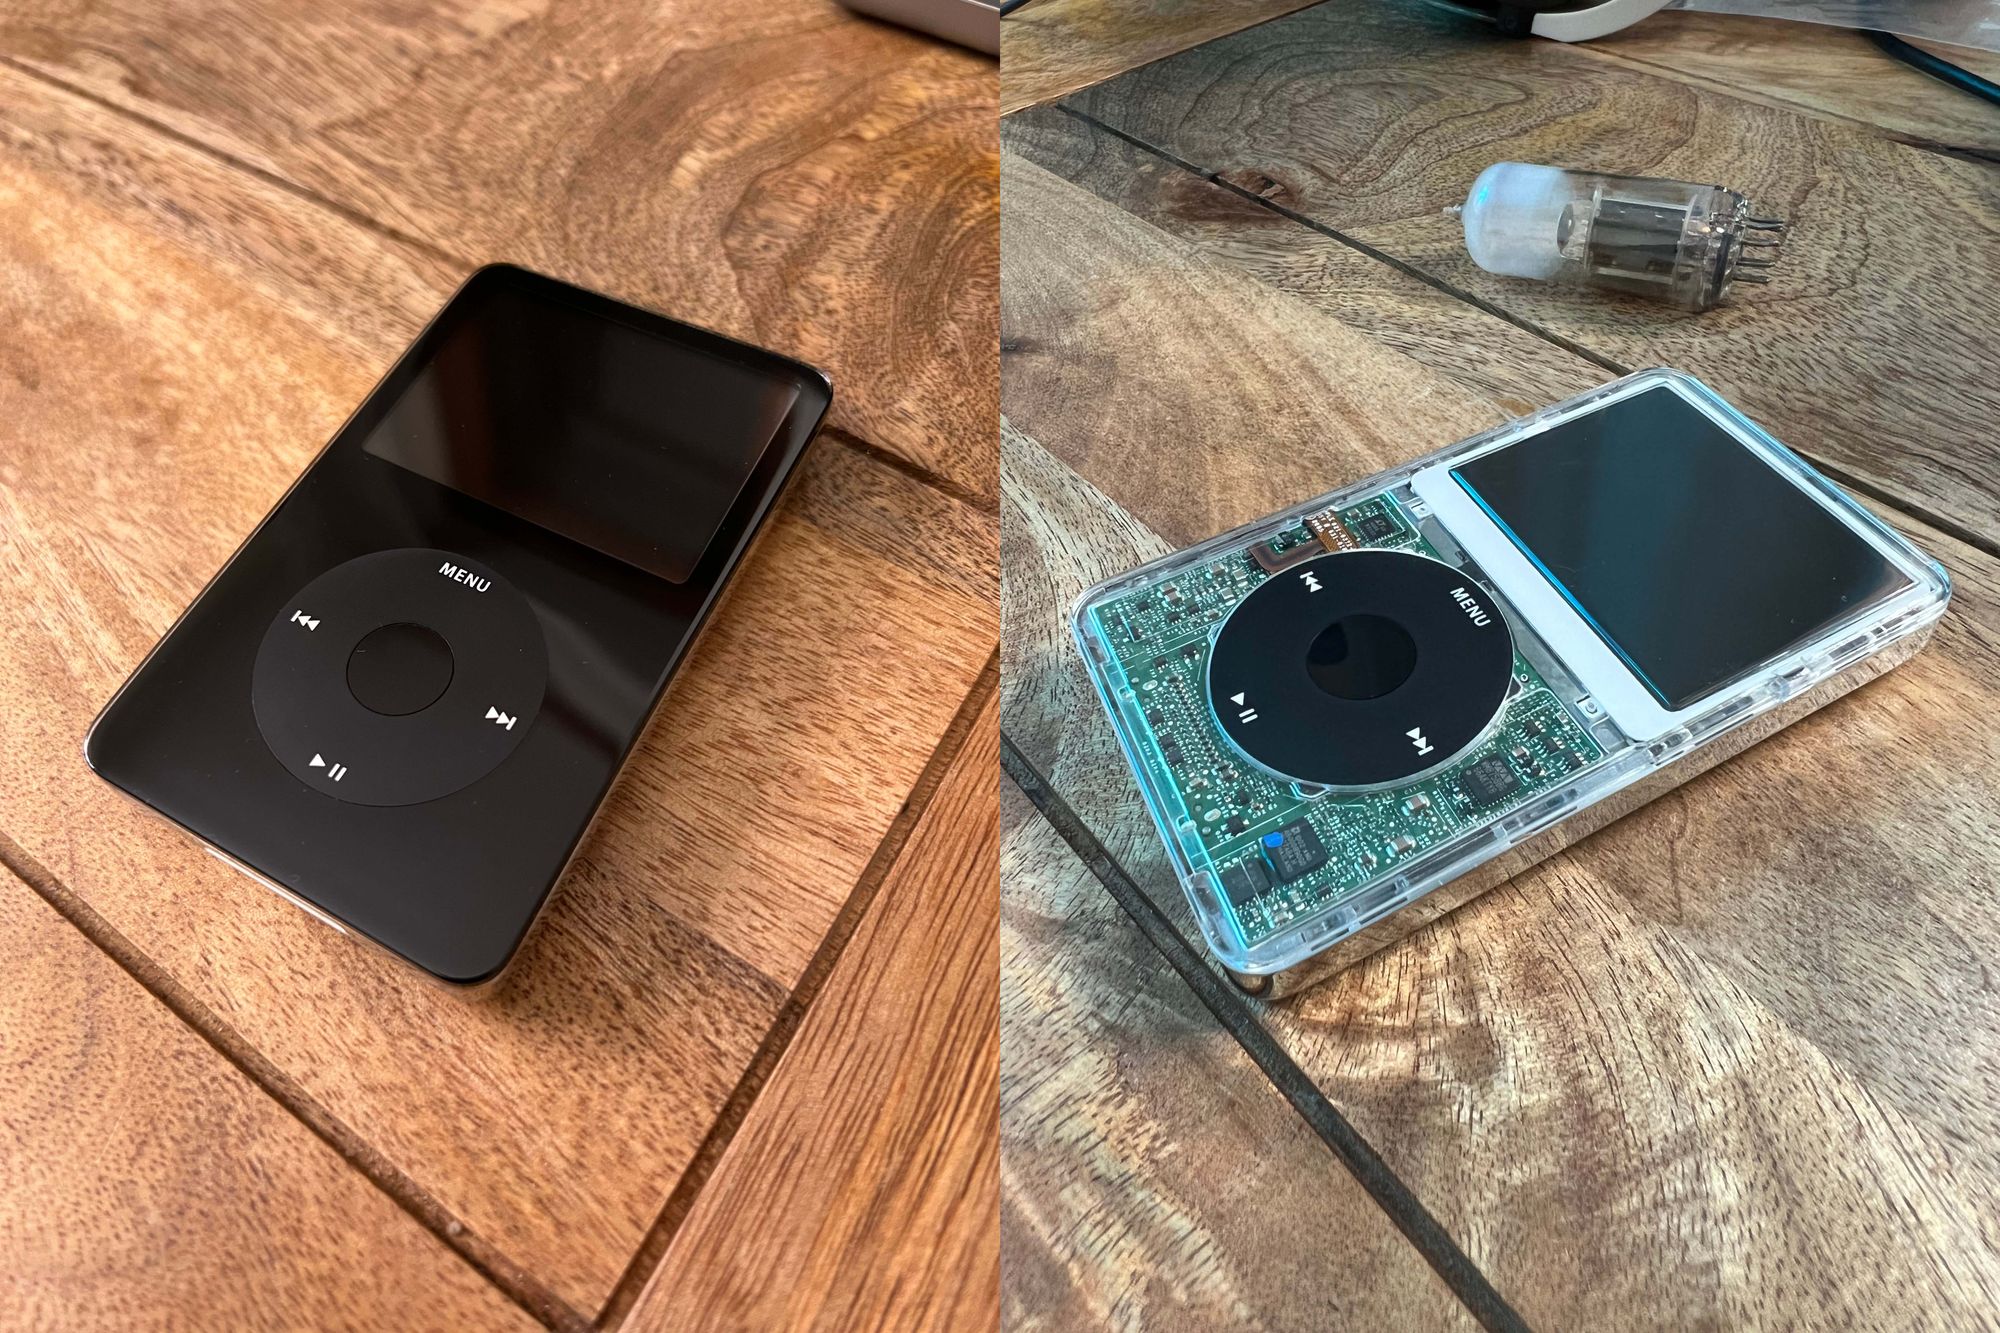 Vanding krybdyr bjerg A Software Engineer Upgraded an Old iPod for 2022